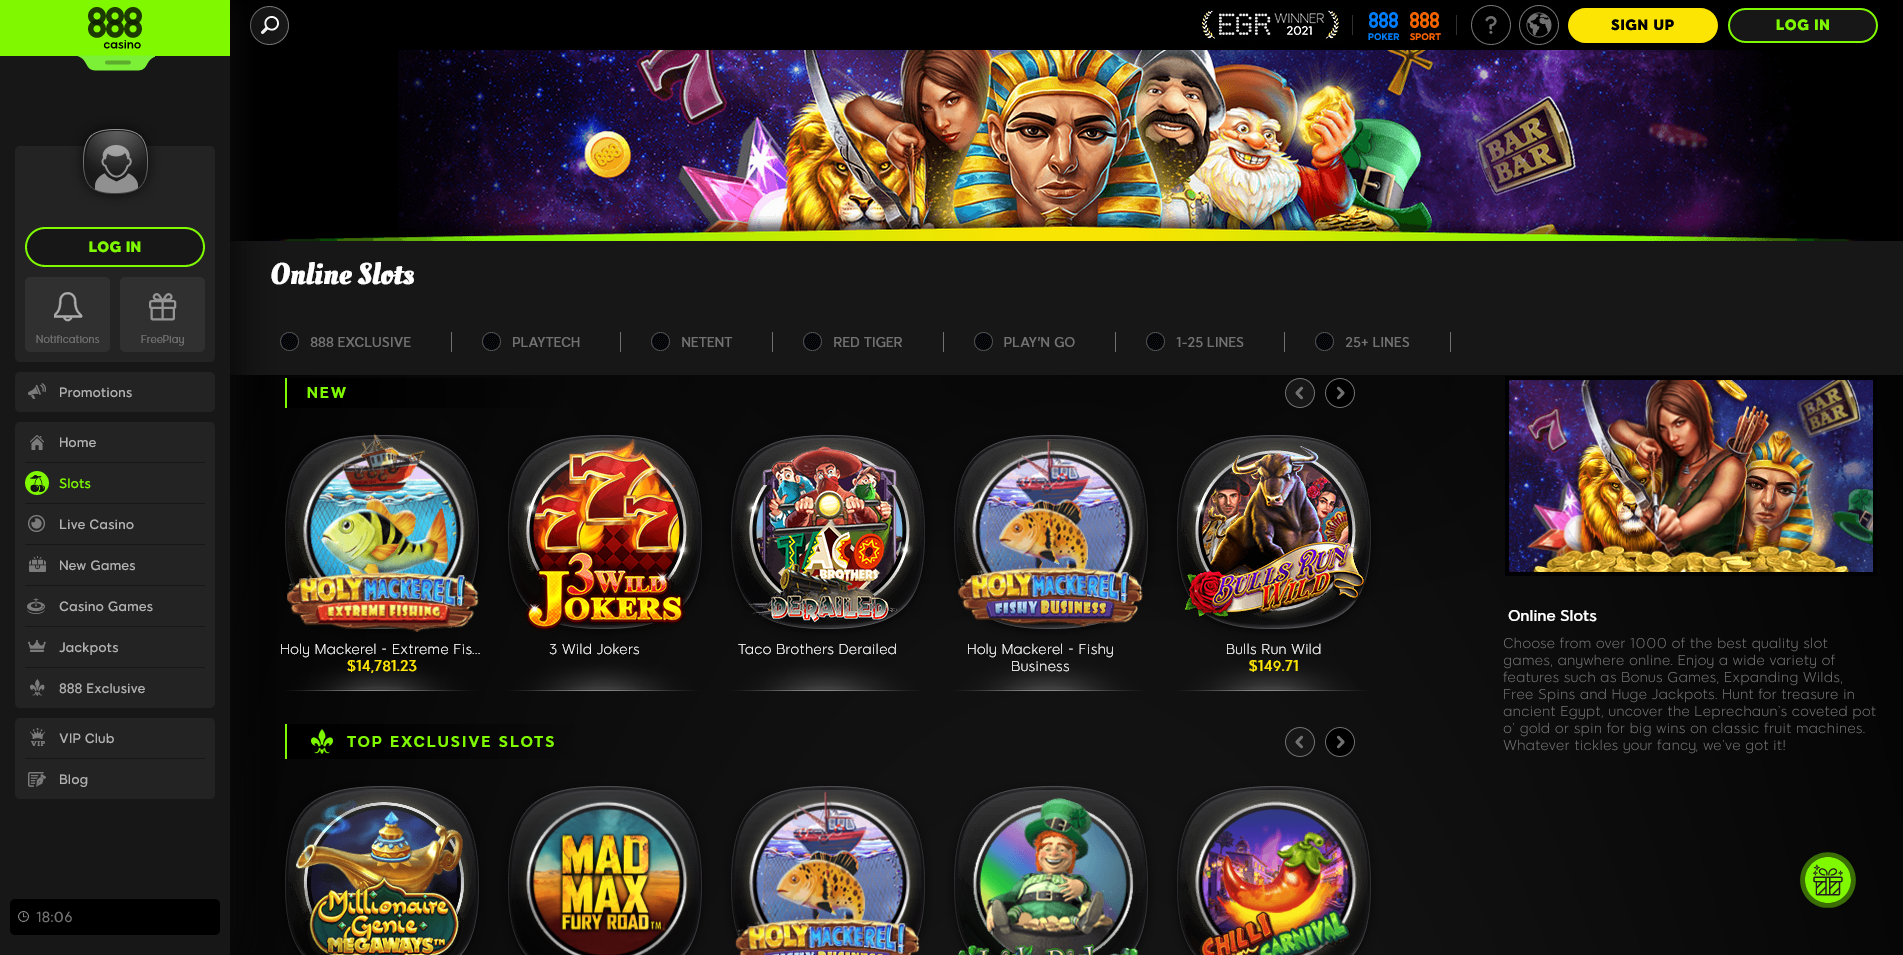 Screenshot of the 888 Casino home page